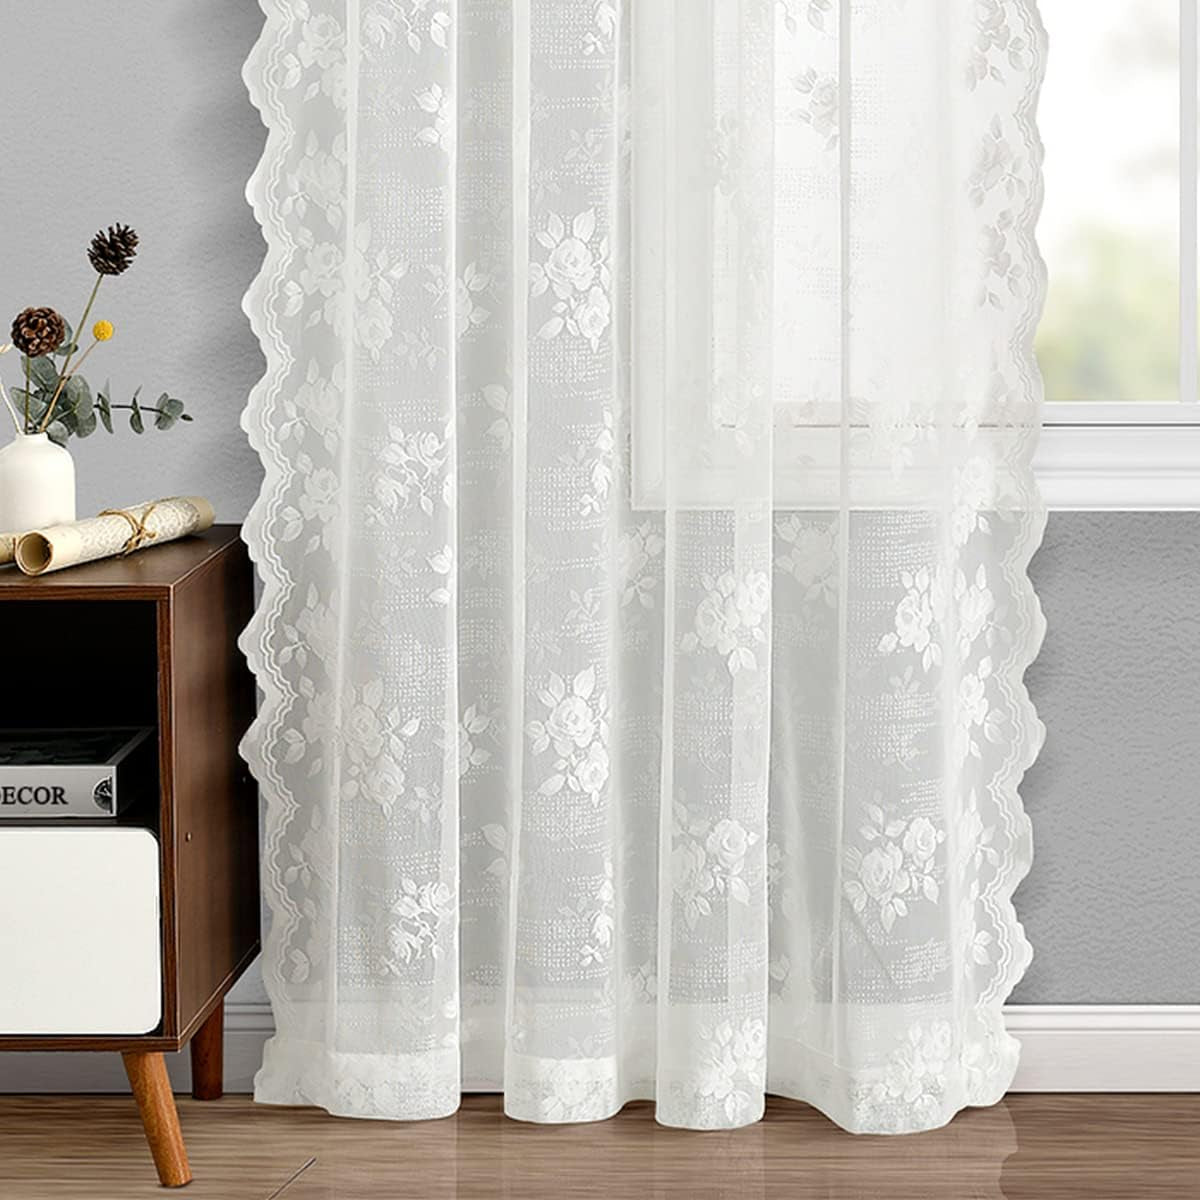 FINECITY Lace Curtains 63 Inch Length - Contemporary Striped Dots Rose Floral Lace Curtains for Girls Room, Scalloped Trim Ivory Lace Window Curtain Panels/Drapes, 52 X 63 Inch, 2 Panels, Ivory/Cream  Keyu Textile   